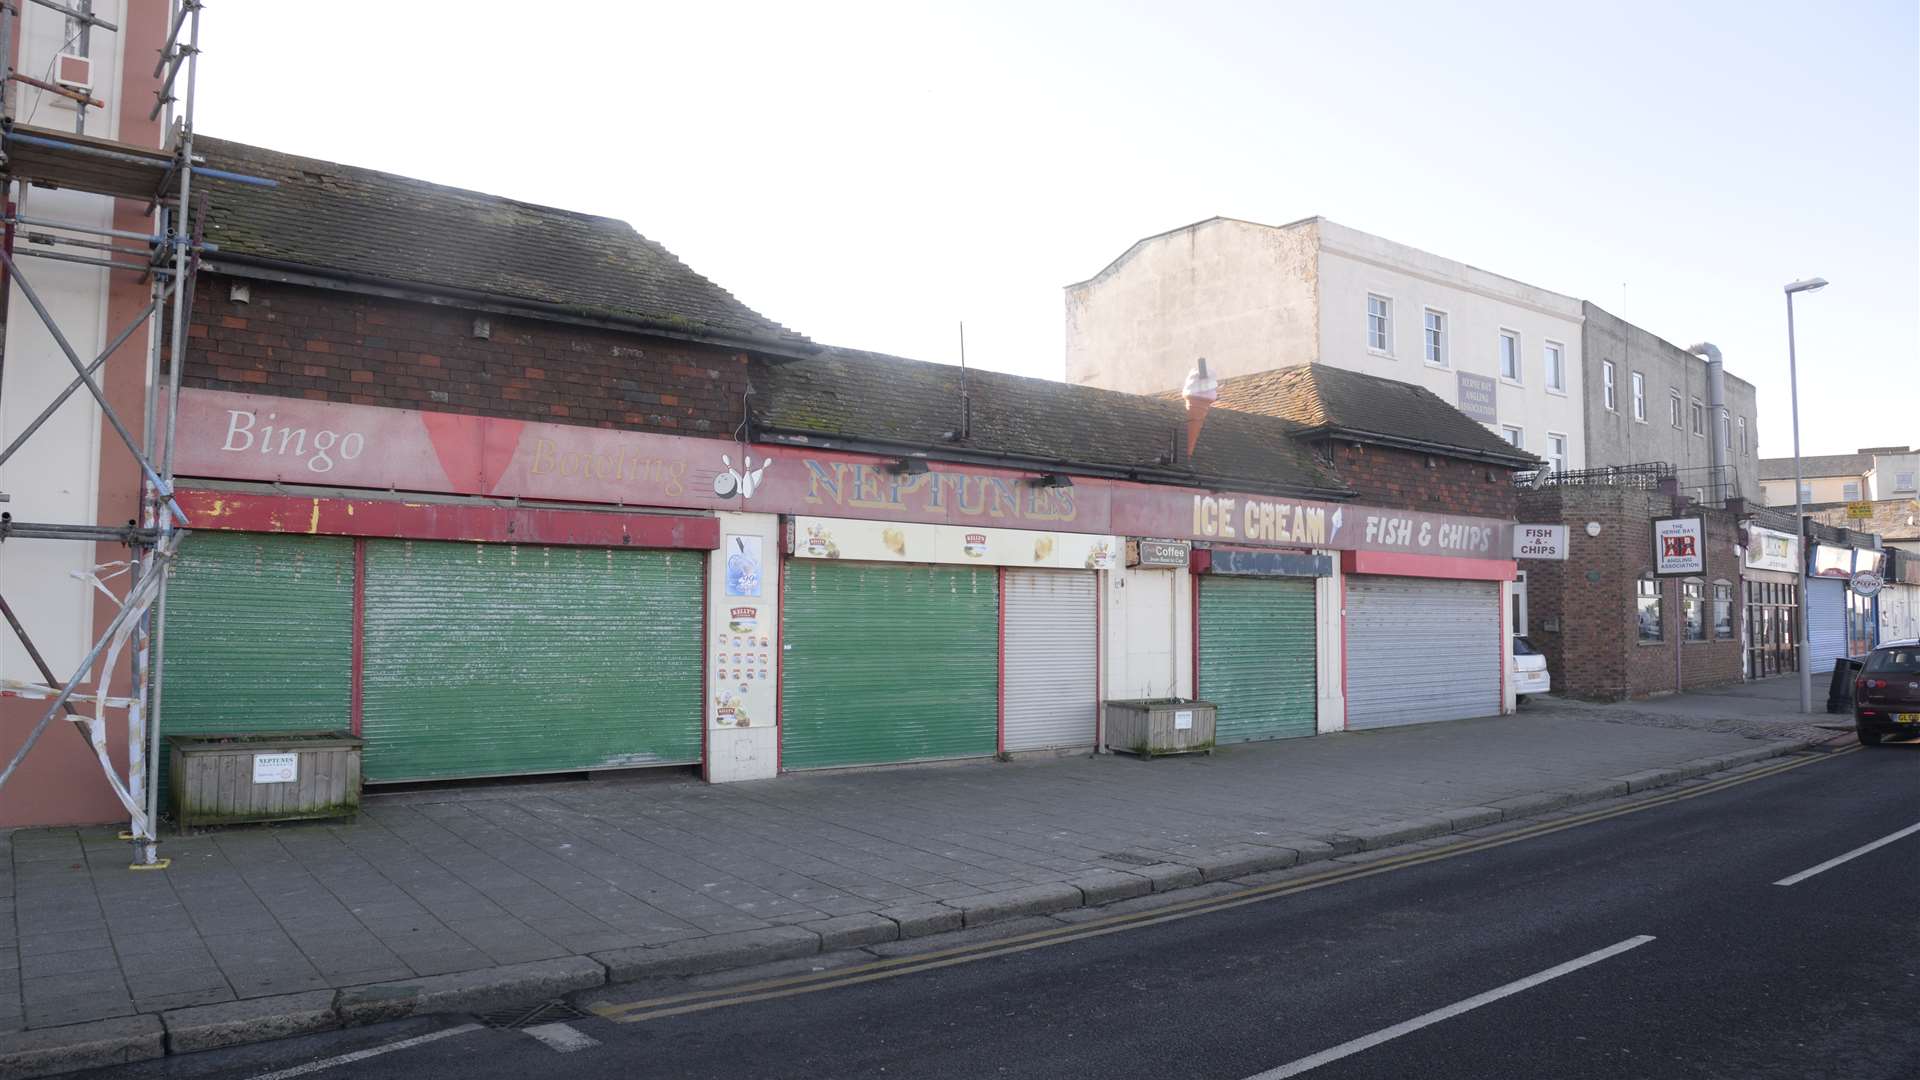 Mr Tevfik also plans to transform these arcades on the seafront